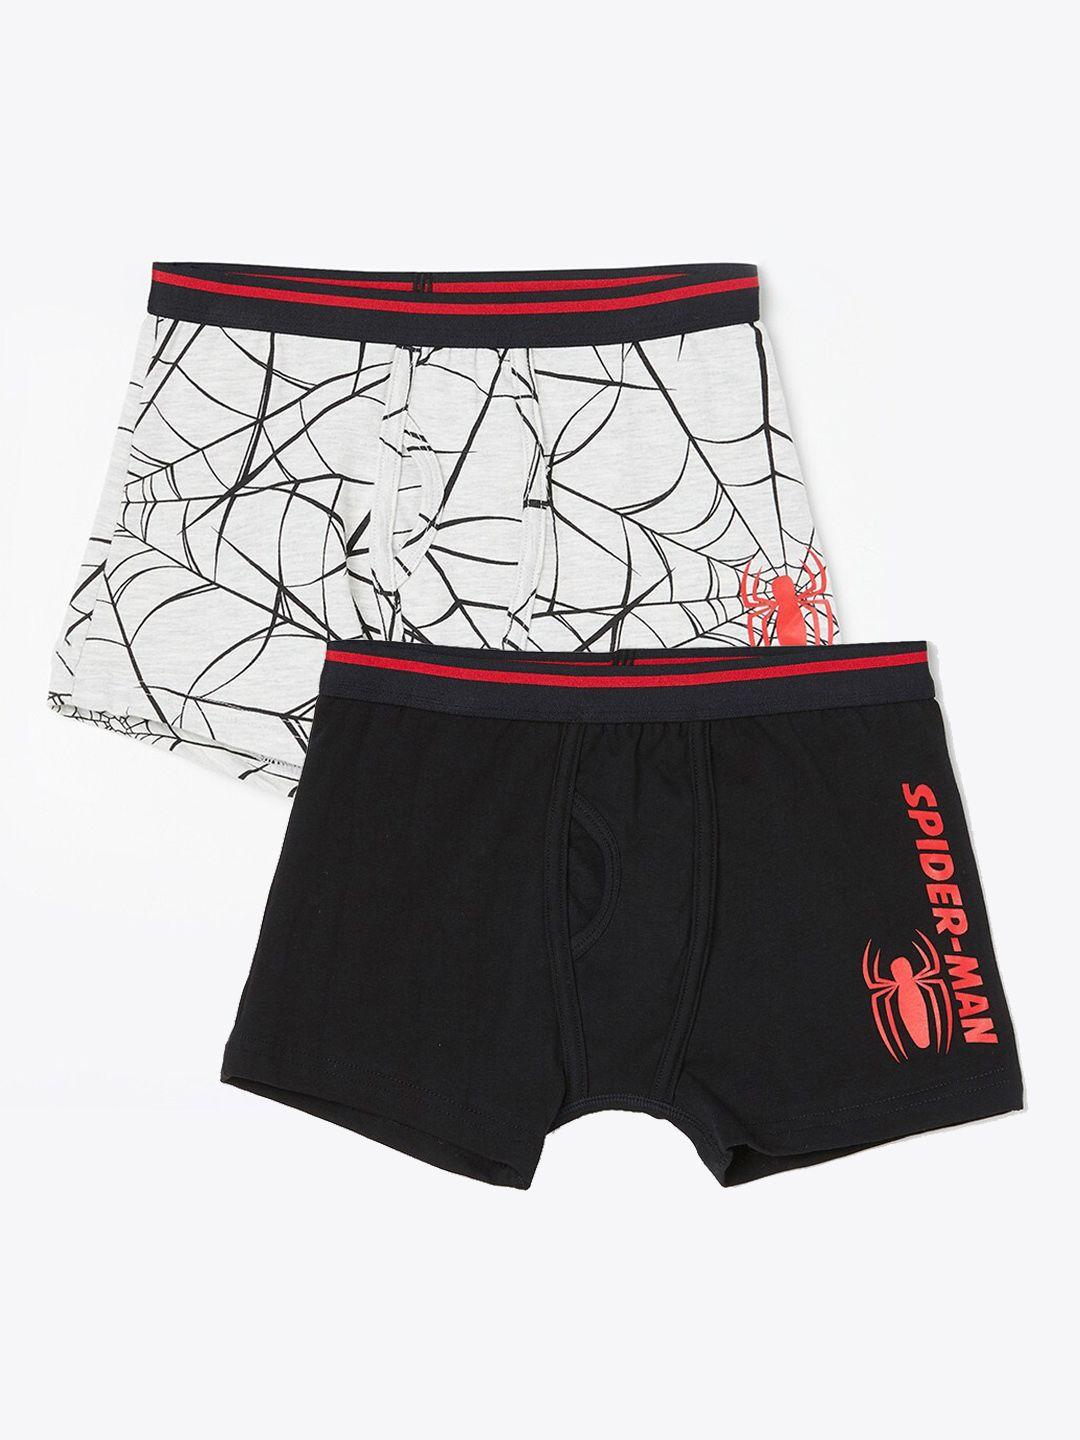 fame forever by lifestyle boys pack of 2 boxers 1000013074960-multi